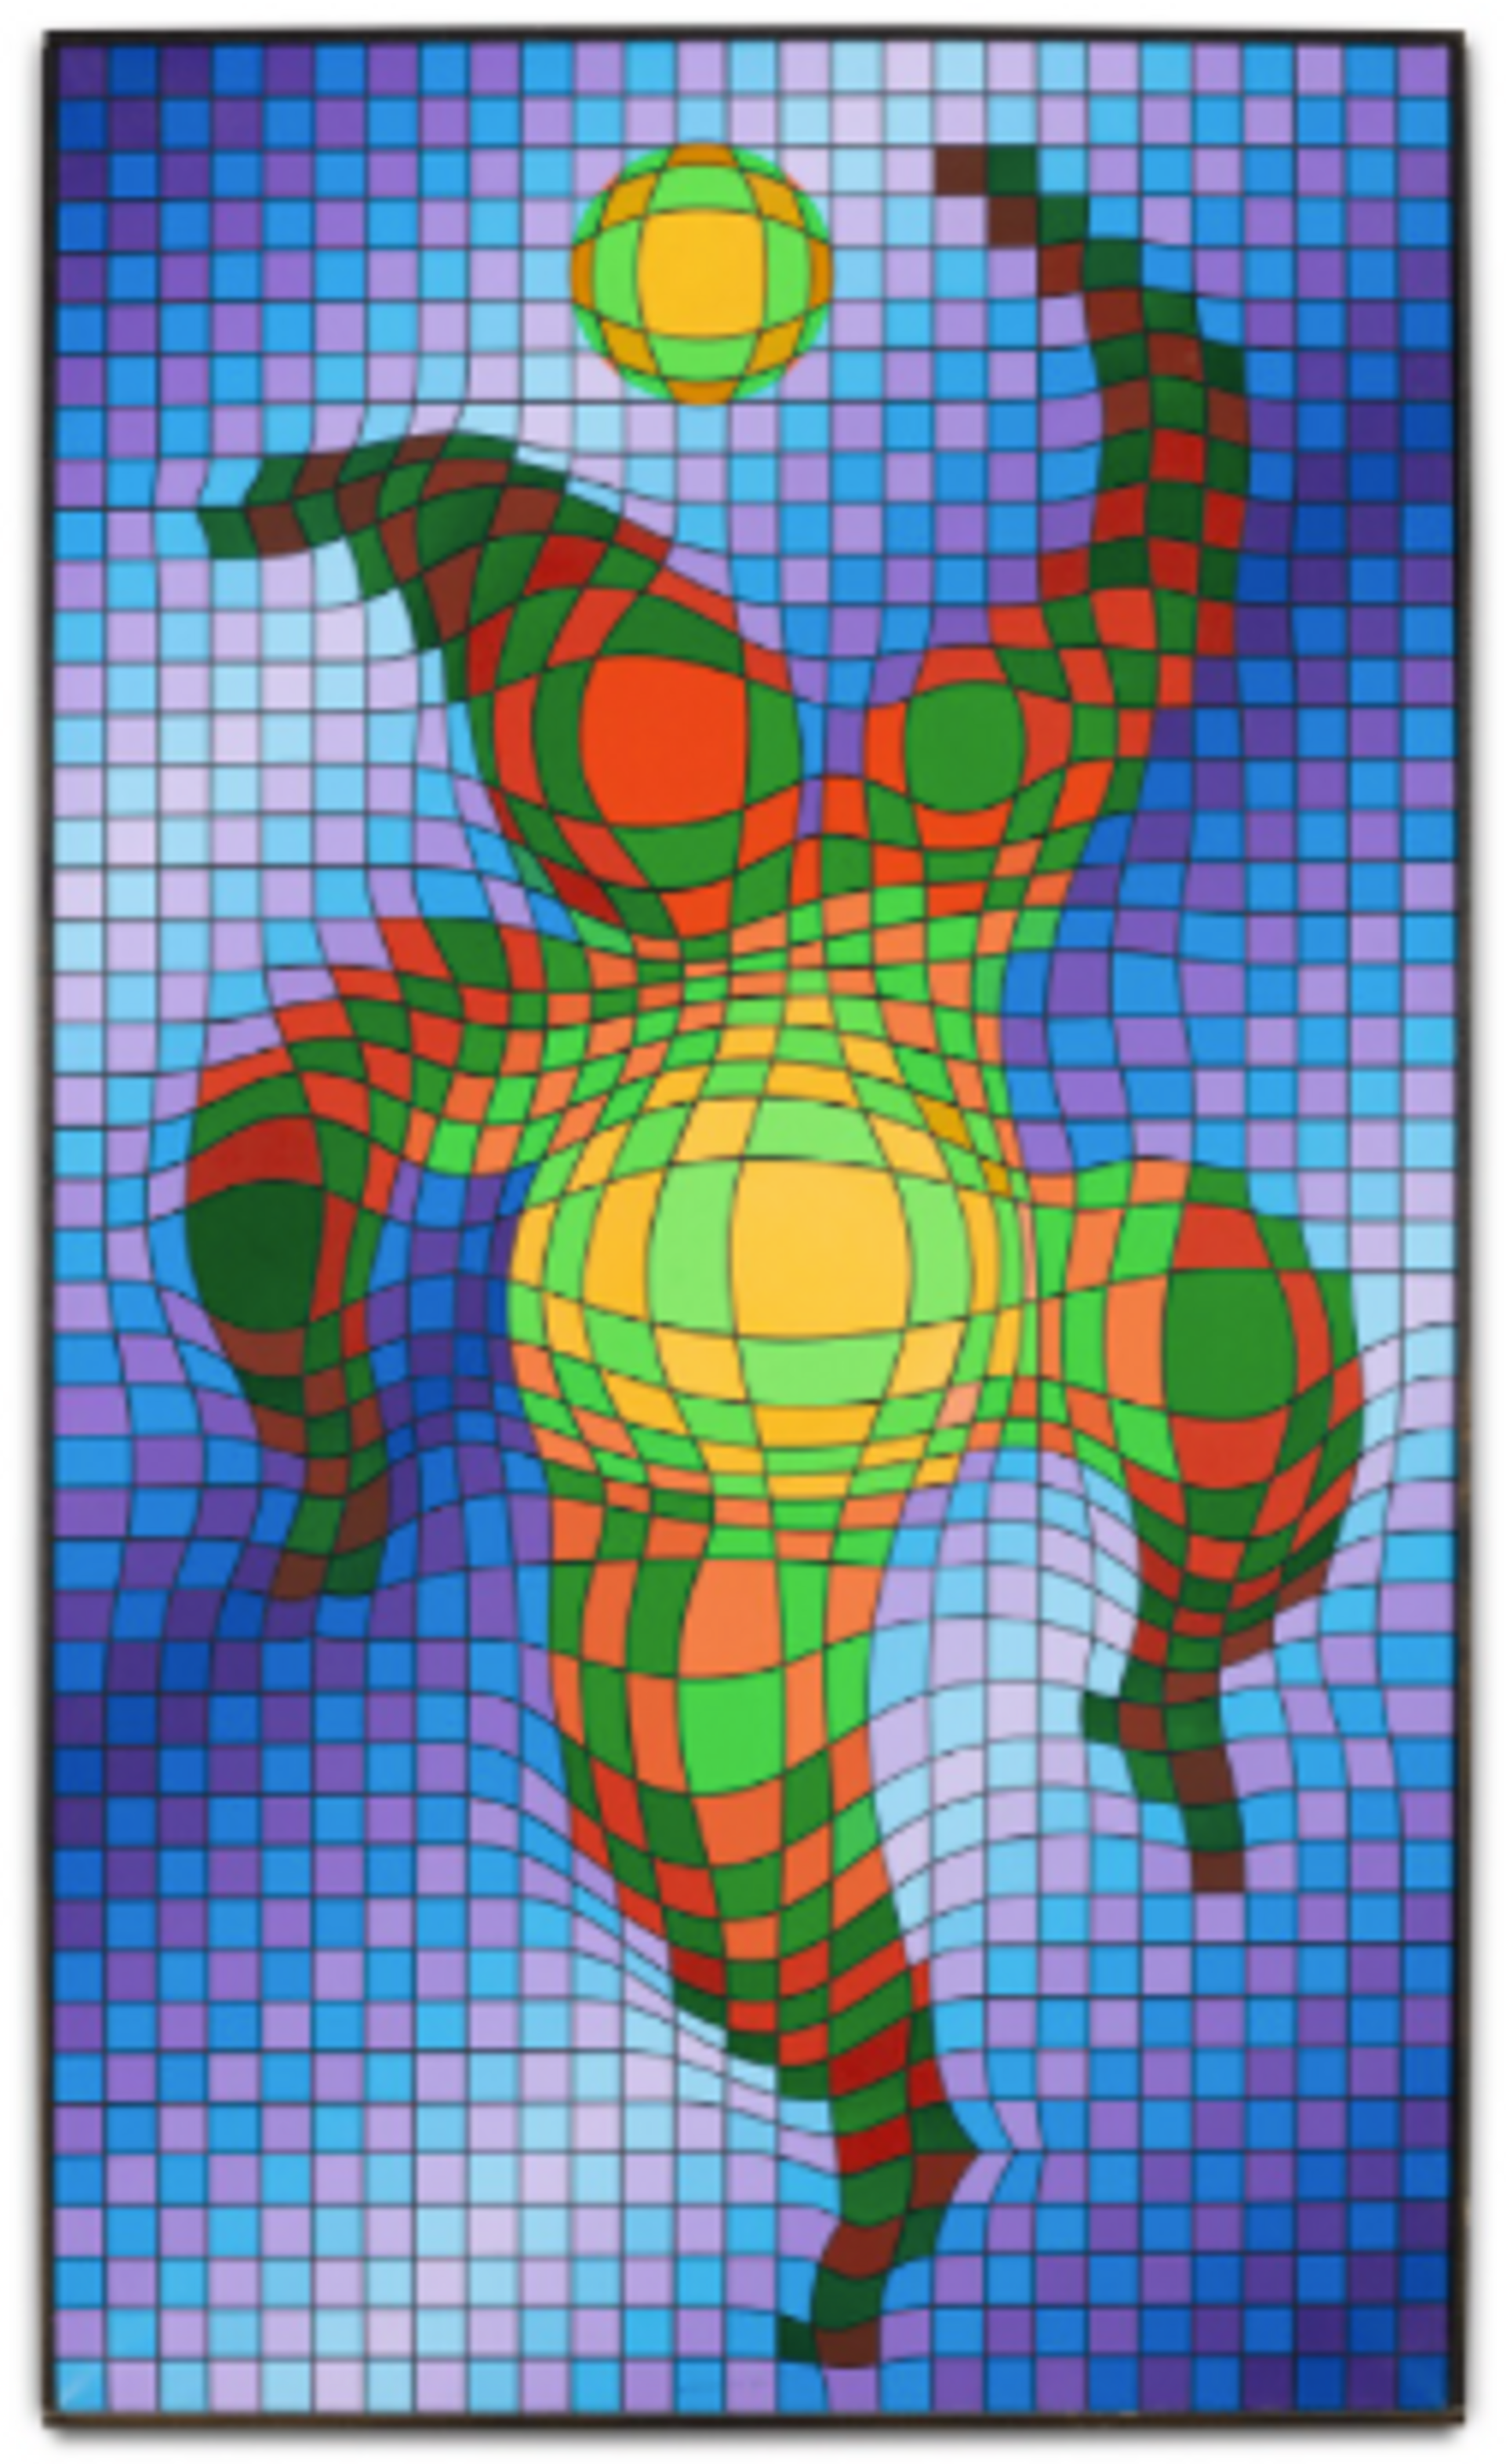 A vibrant geometric abstract artwork showcasing a playful, faceless harlequin at the center, engaging with a ball. The composition incorporates shades of green and orange, set against a backdrop of a blue and purple grid pattern.